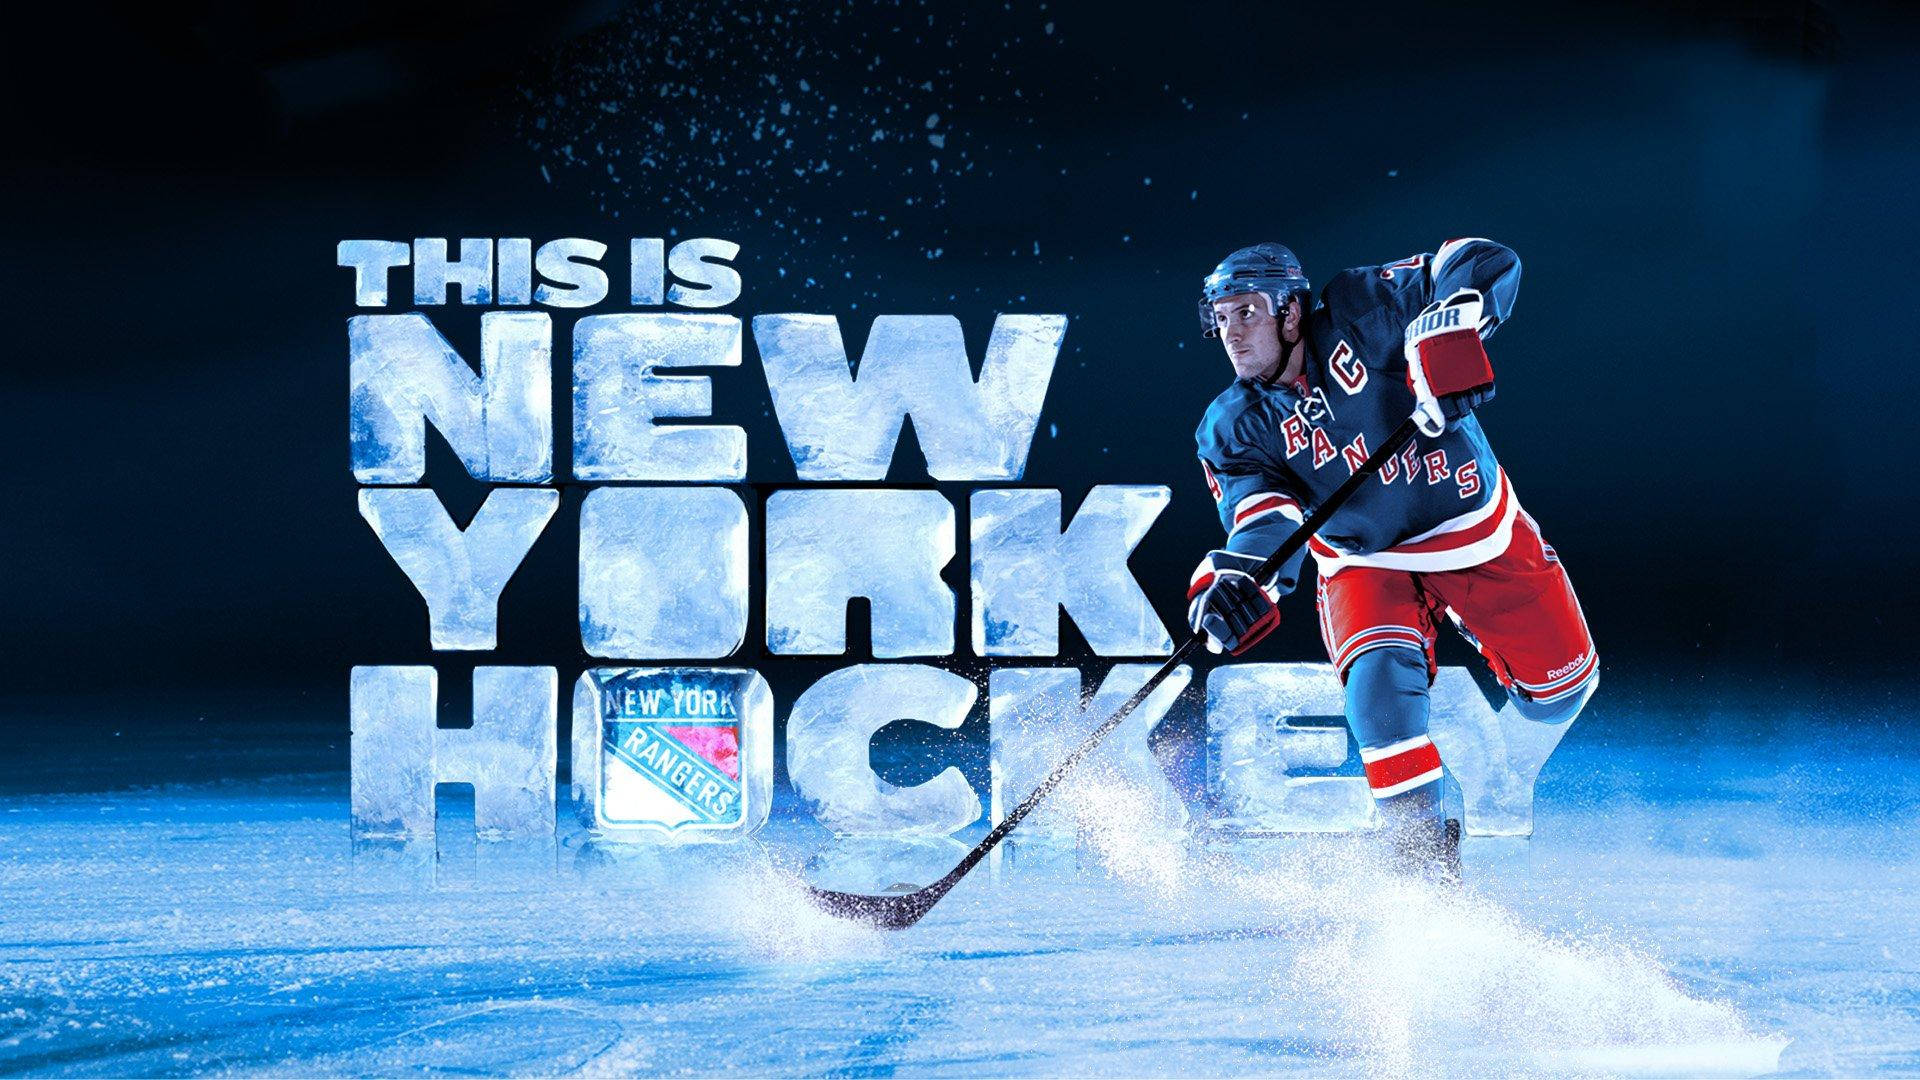 Exciting Ice Hockey Action With The New York Rangers Wallpaper